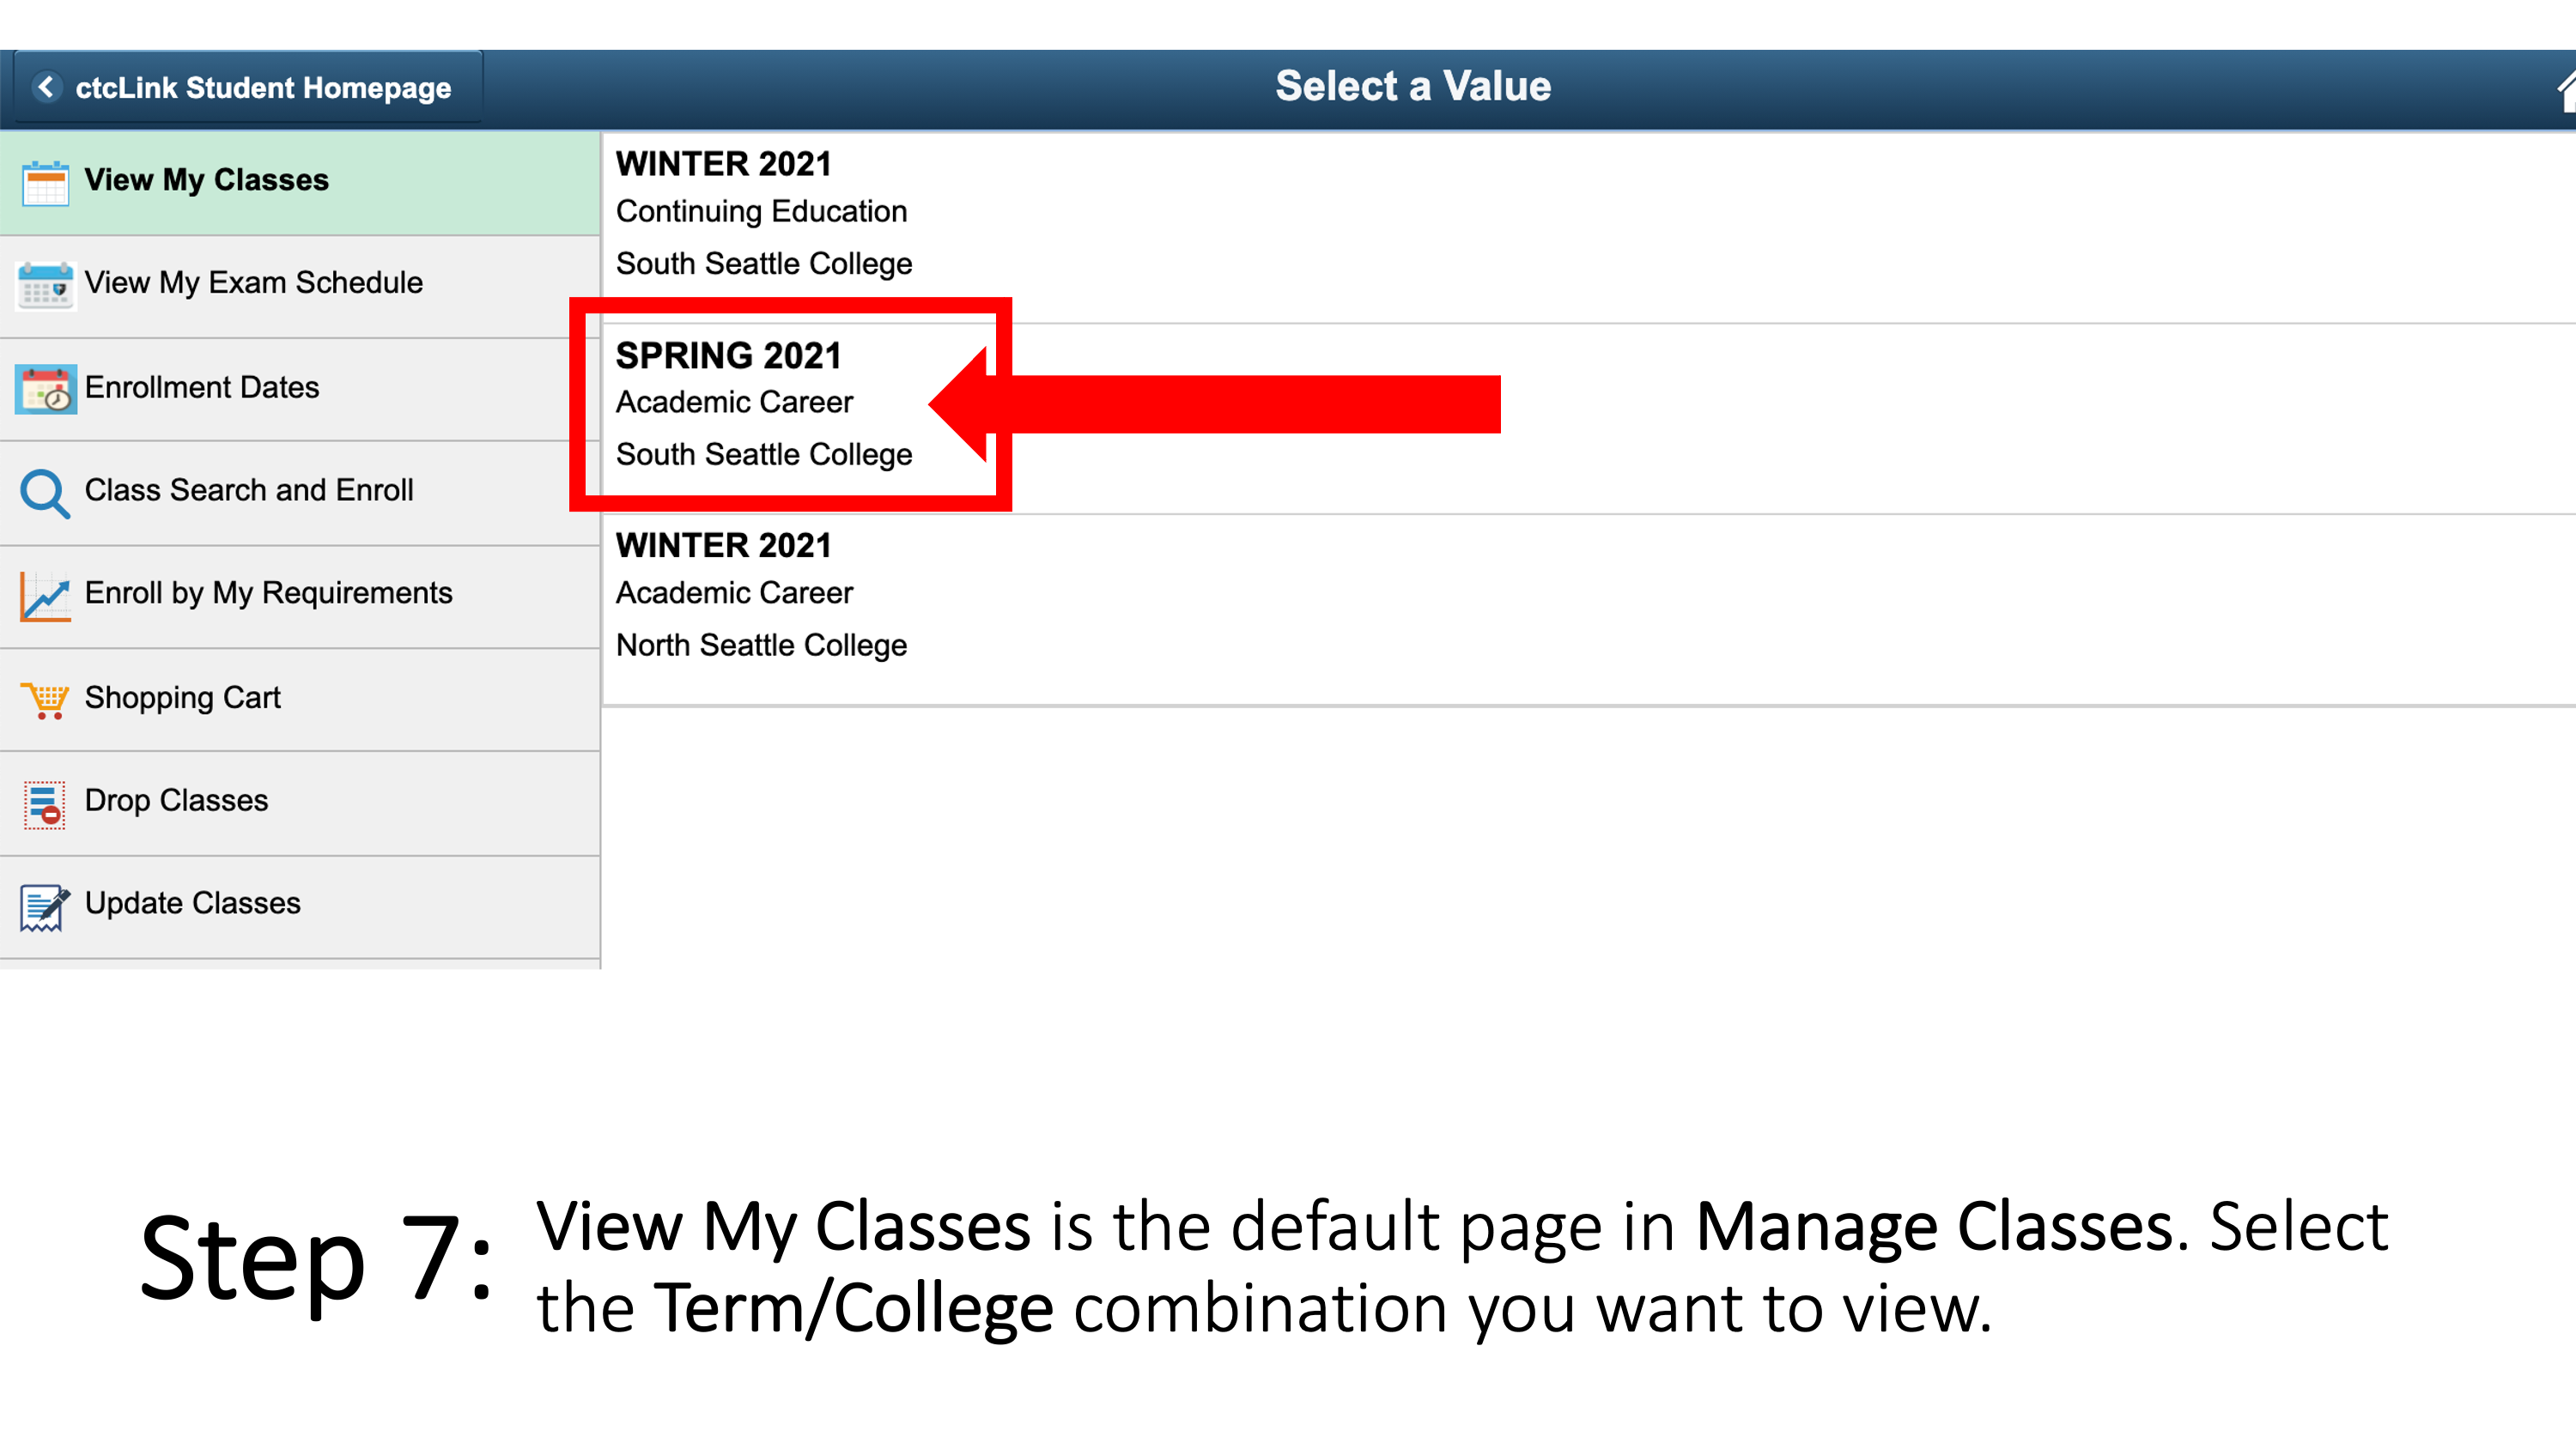 View My Classes is the default page in Manage Classes. Select the Term/College combination you want to view.